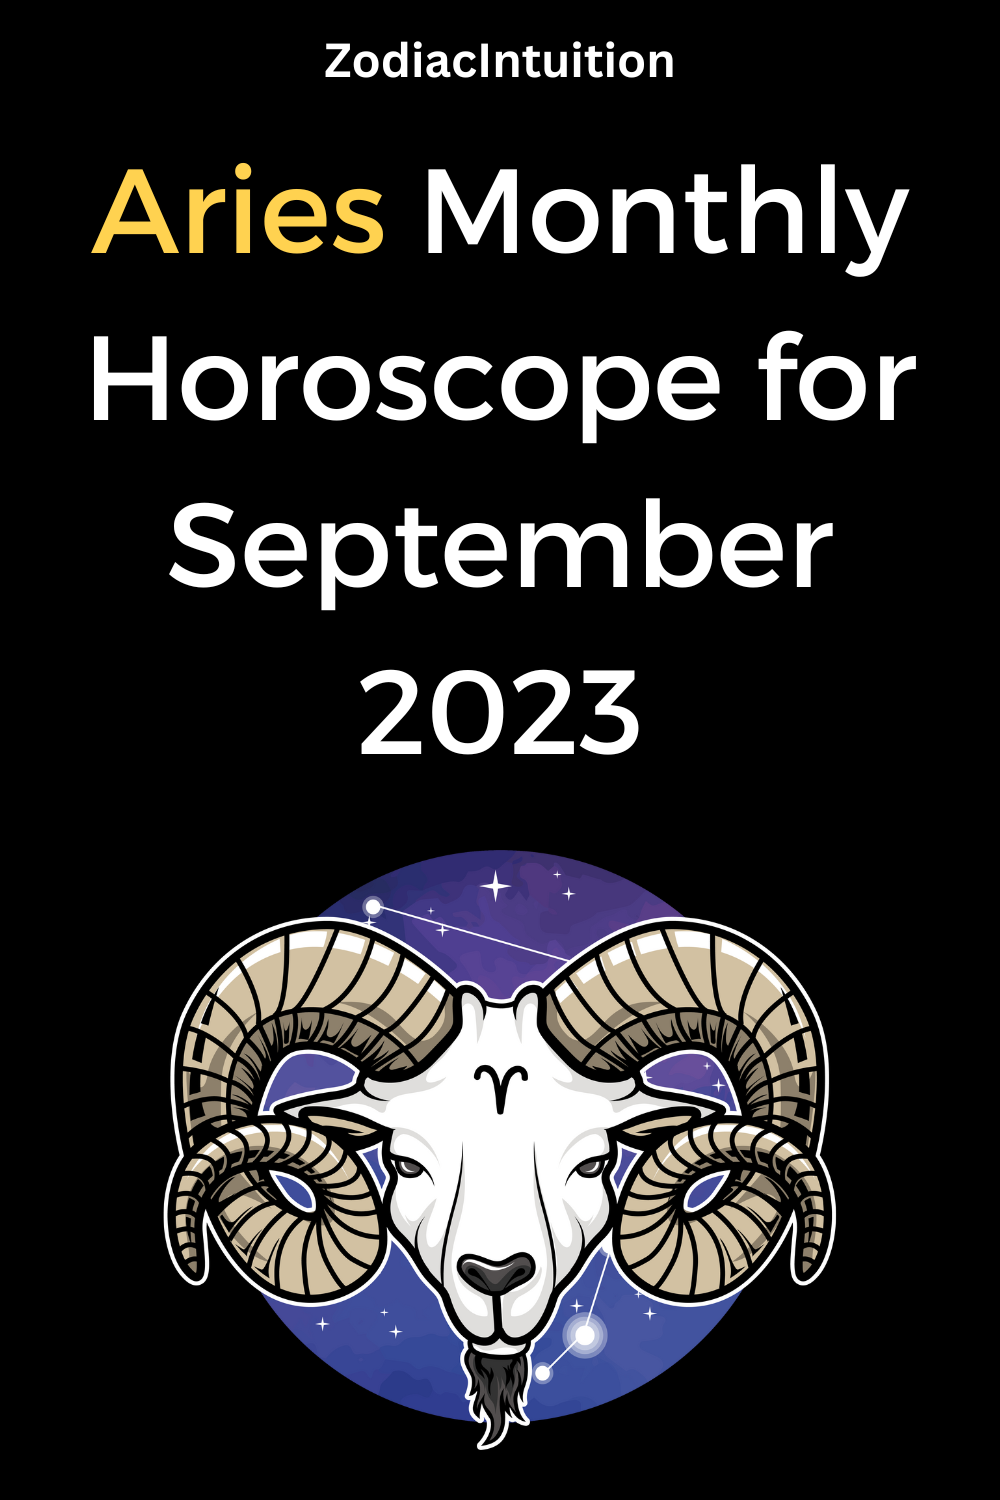 Aries Monthly Horoscope for September 2023 - Zodiac Signs